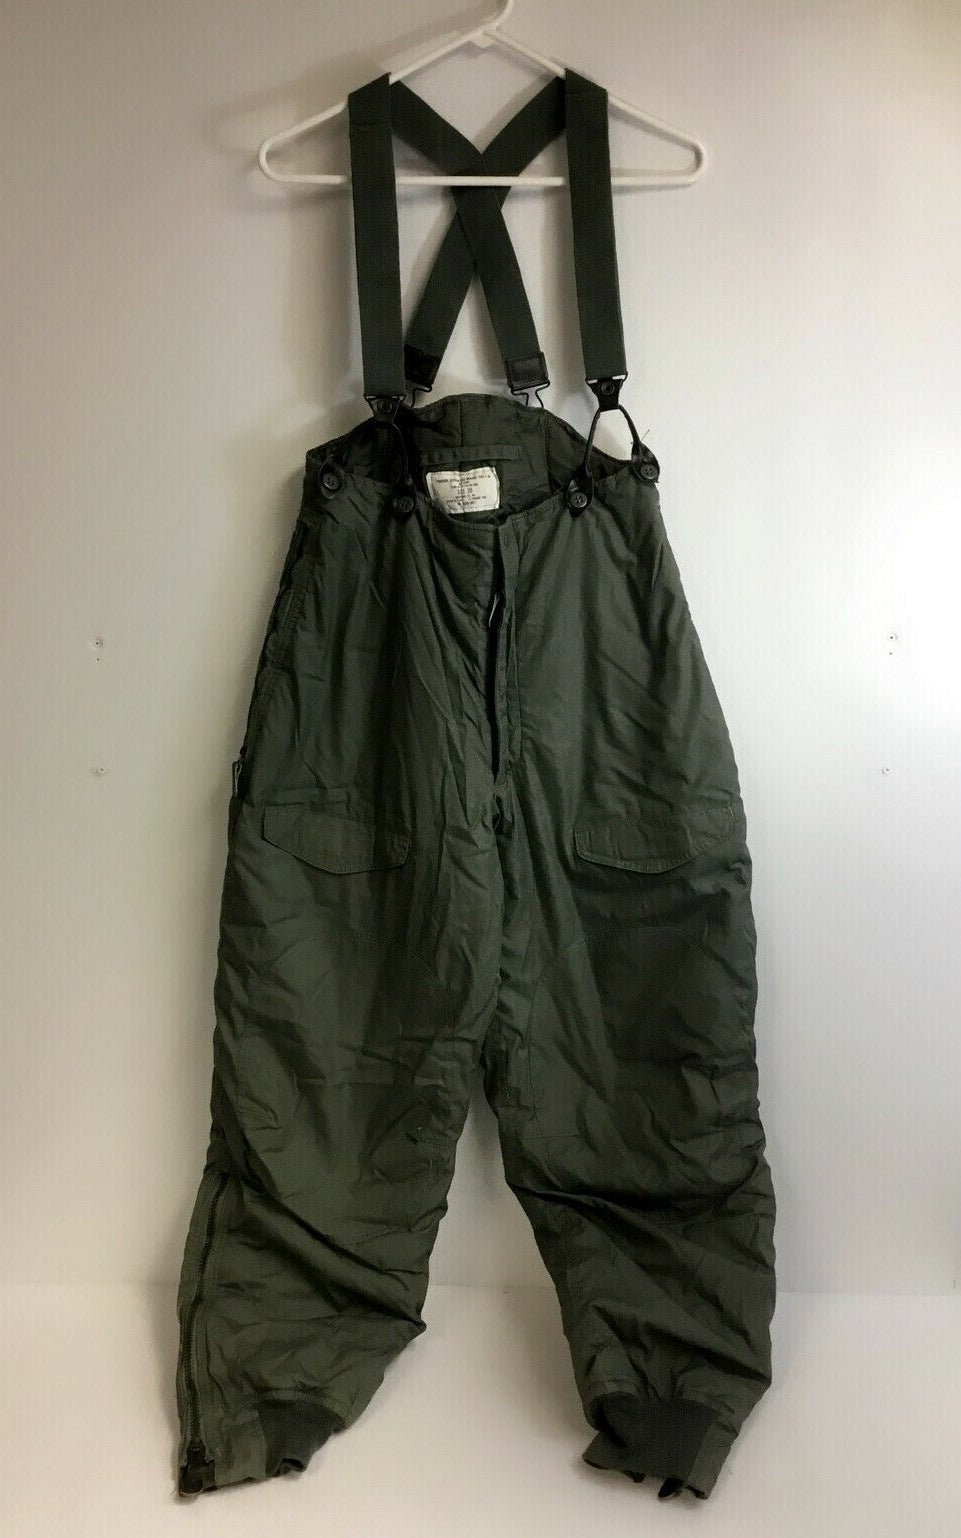 US Military Air Force Extreme Cold Weather Trousers Pants w/Suspenders Type F-1B Size 30 